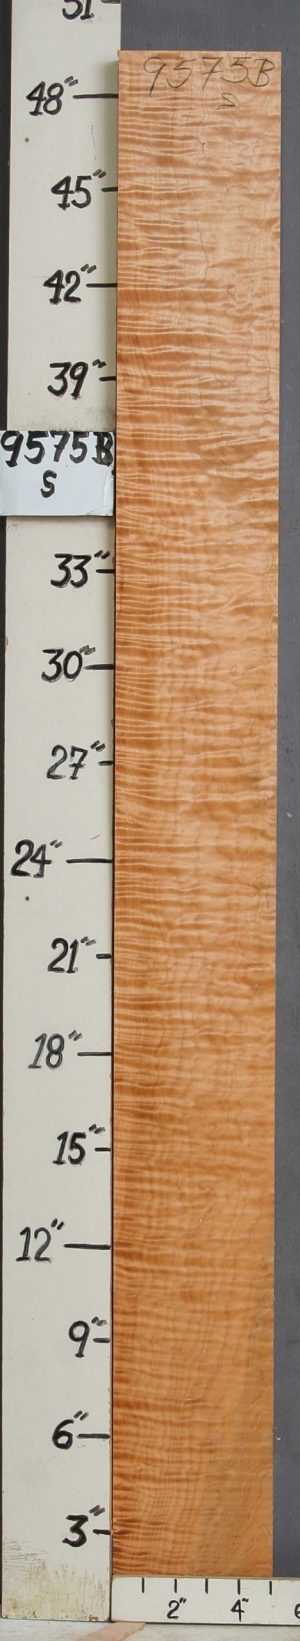 MUSICAL QUILTED MAPLE LUMBER 5" X 49" X 5/4 (NWT-9575B